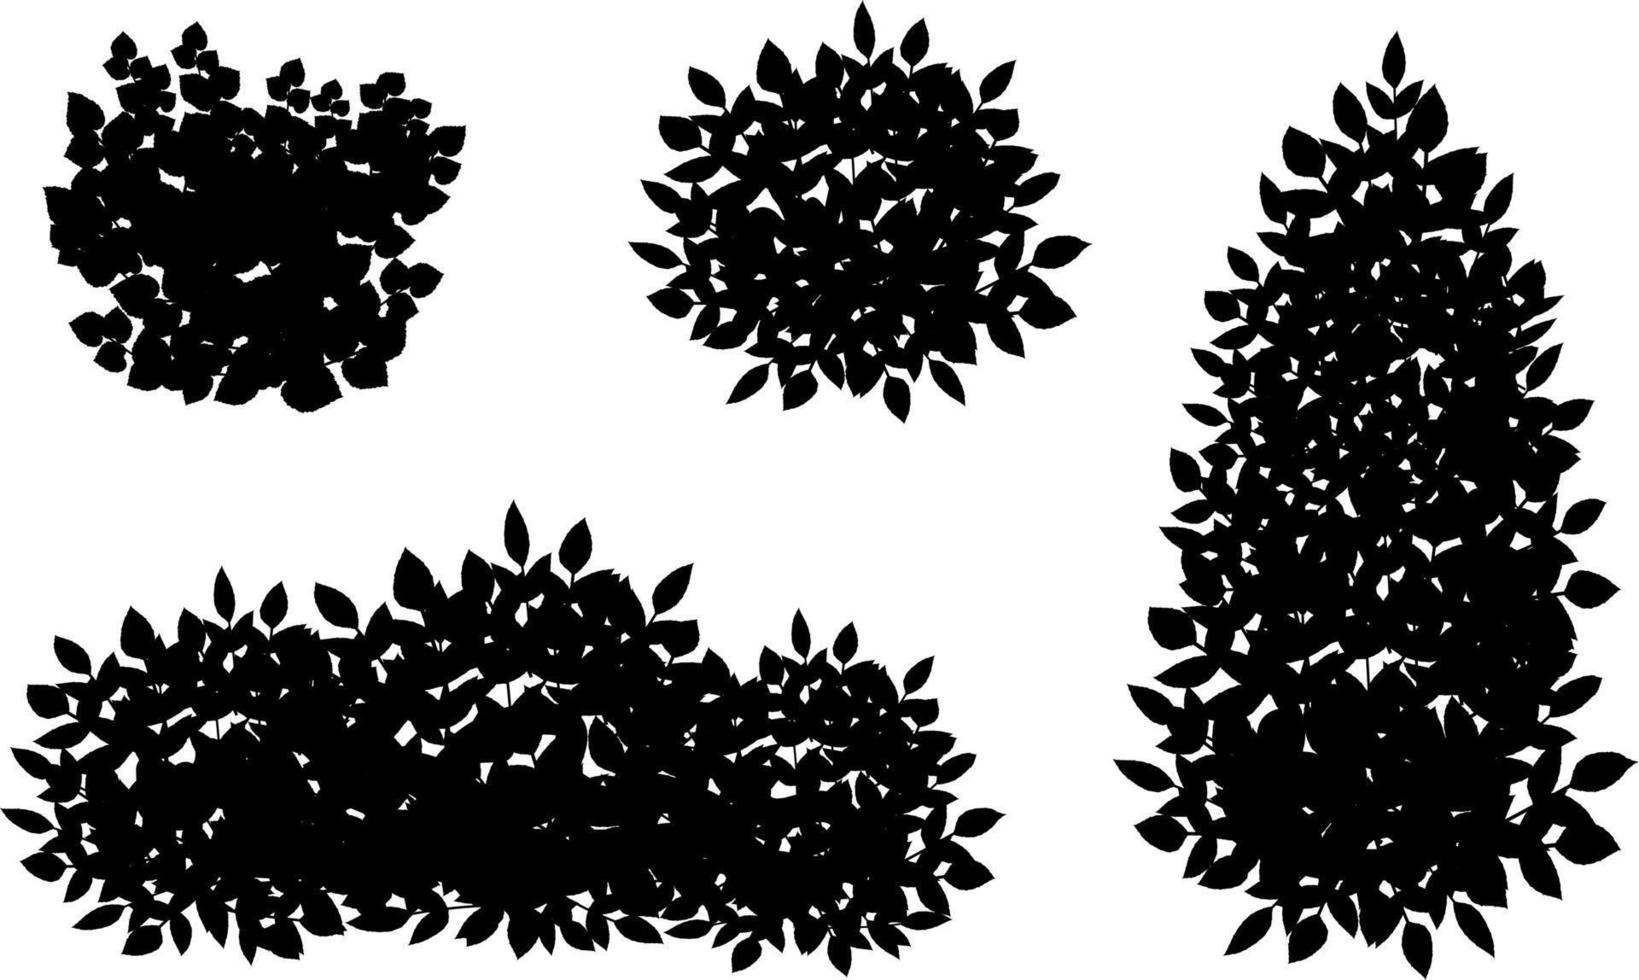 Monochrome vector drawing of bushes.